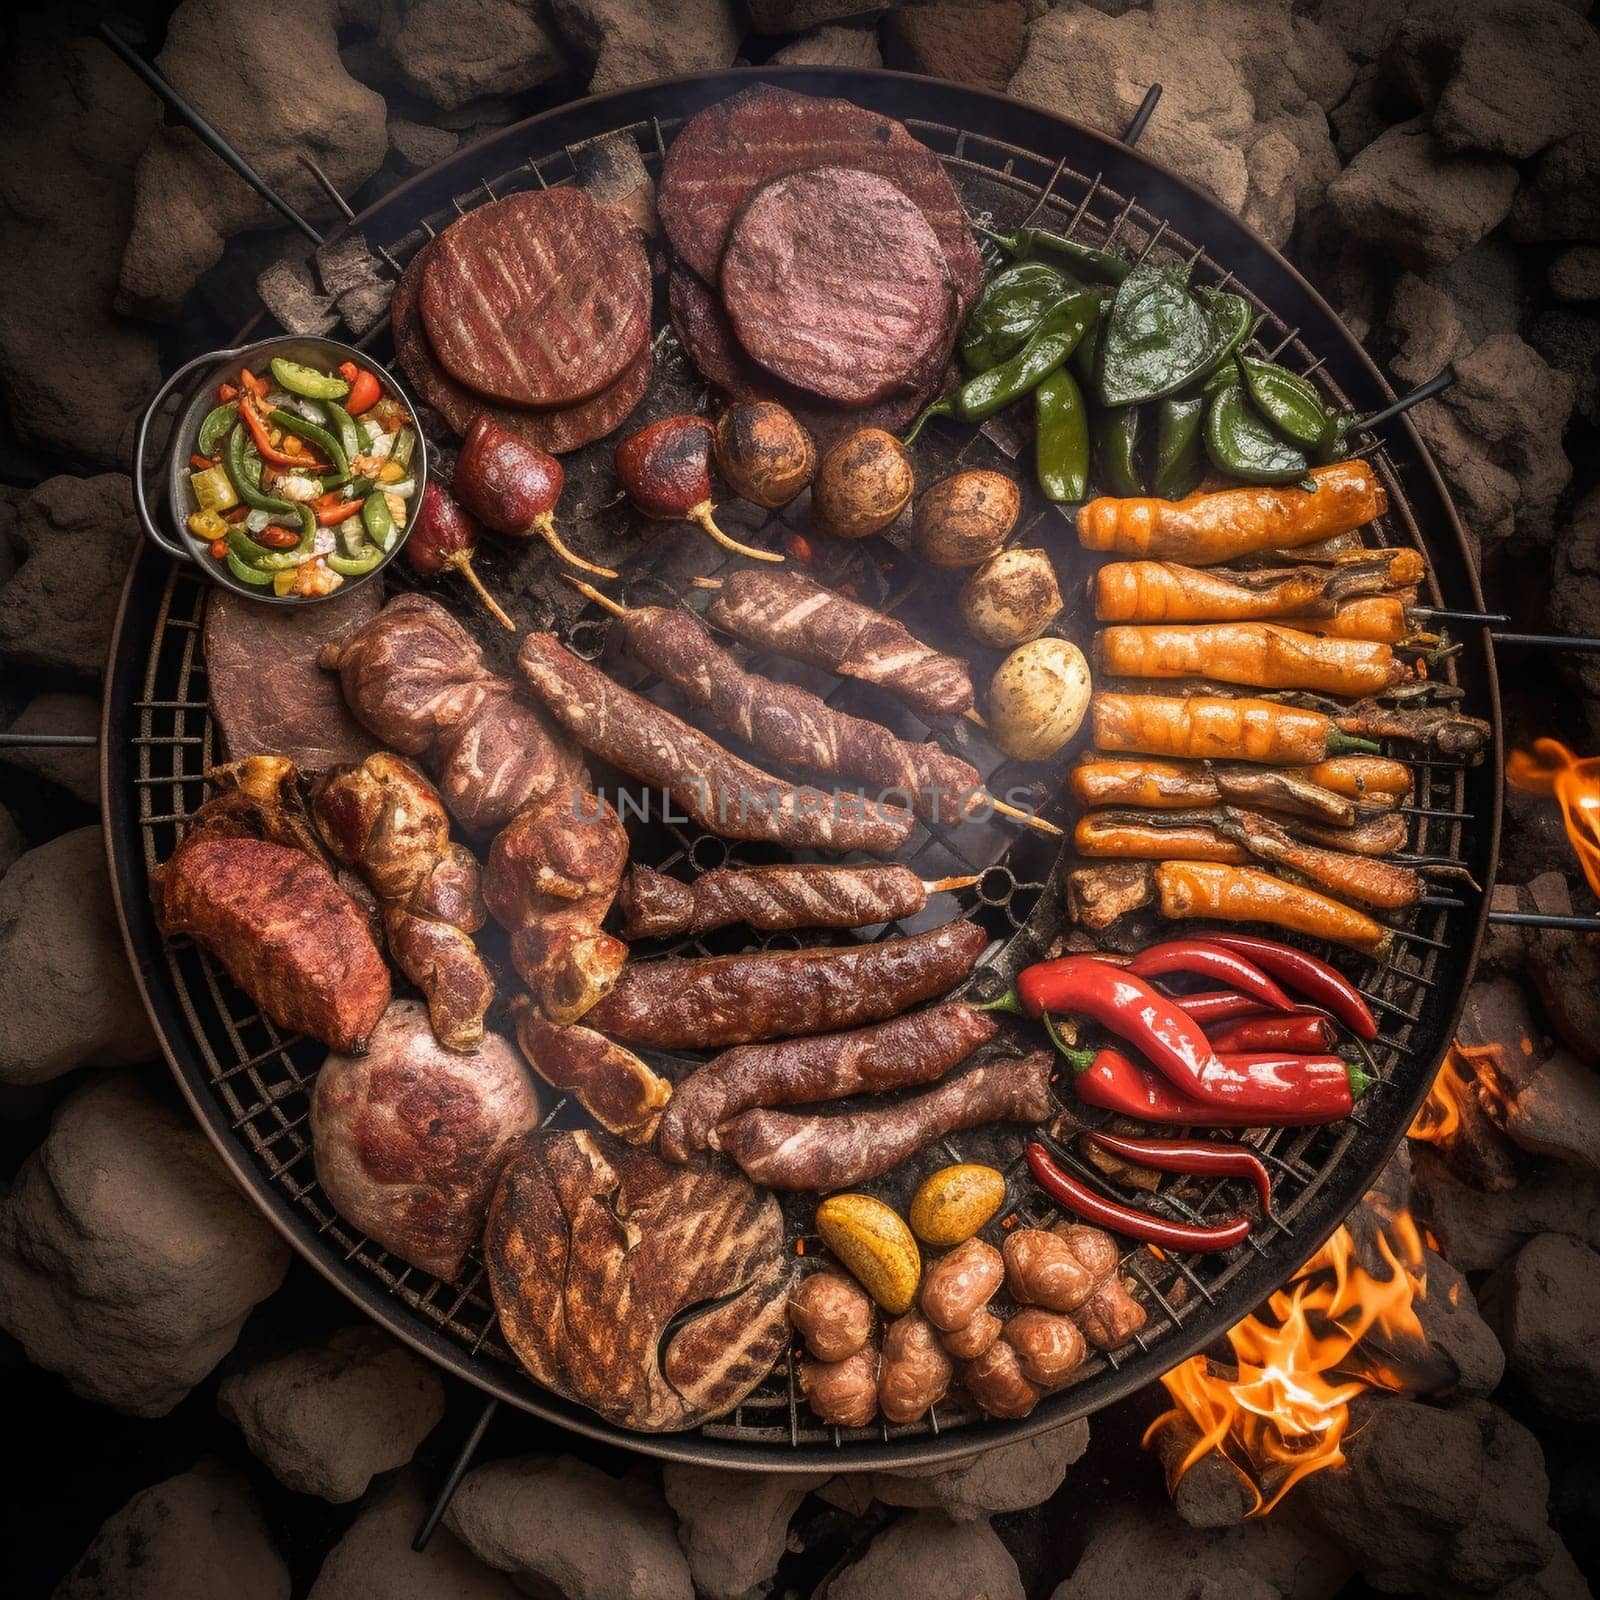 Indulge in the mouth-watering flavors and festive atmosphere of an Argentina Asado (barbecue) with this enticing overhead shot. The scene features a sizzling grill filled with a variety of meats, including beef, pork, and sausages, as well as grilled vegetables like peppers and onions. The meat is cooked to perfection, with a golden-brown crust and juicy pink interior, and is served on a wooden platter with chimichurri sauce on the side. In the background, there's a lively outdoor gathering of friends and family, with colorful decorations and music adding to the festive atmosphere. The soft, natural lighting with a diffuser highlights the textures and colors of the food, evoking feelings of warmth, togetherness, and celebration.